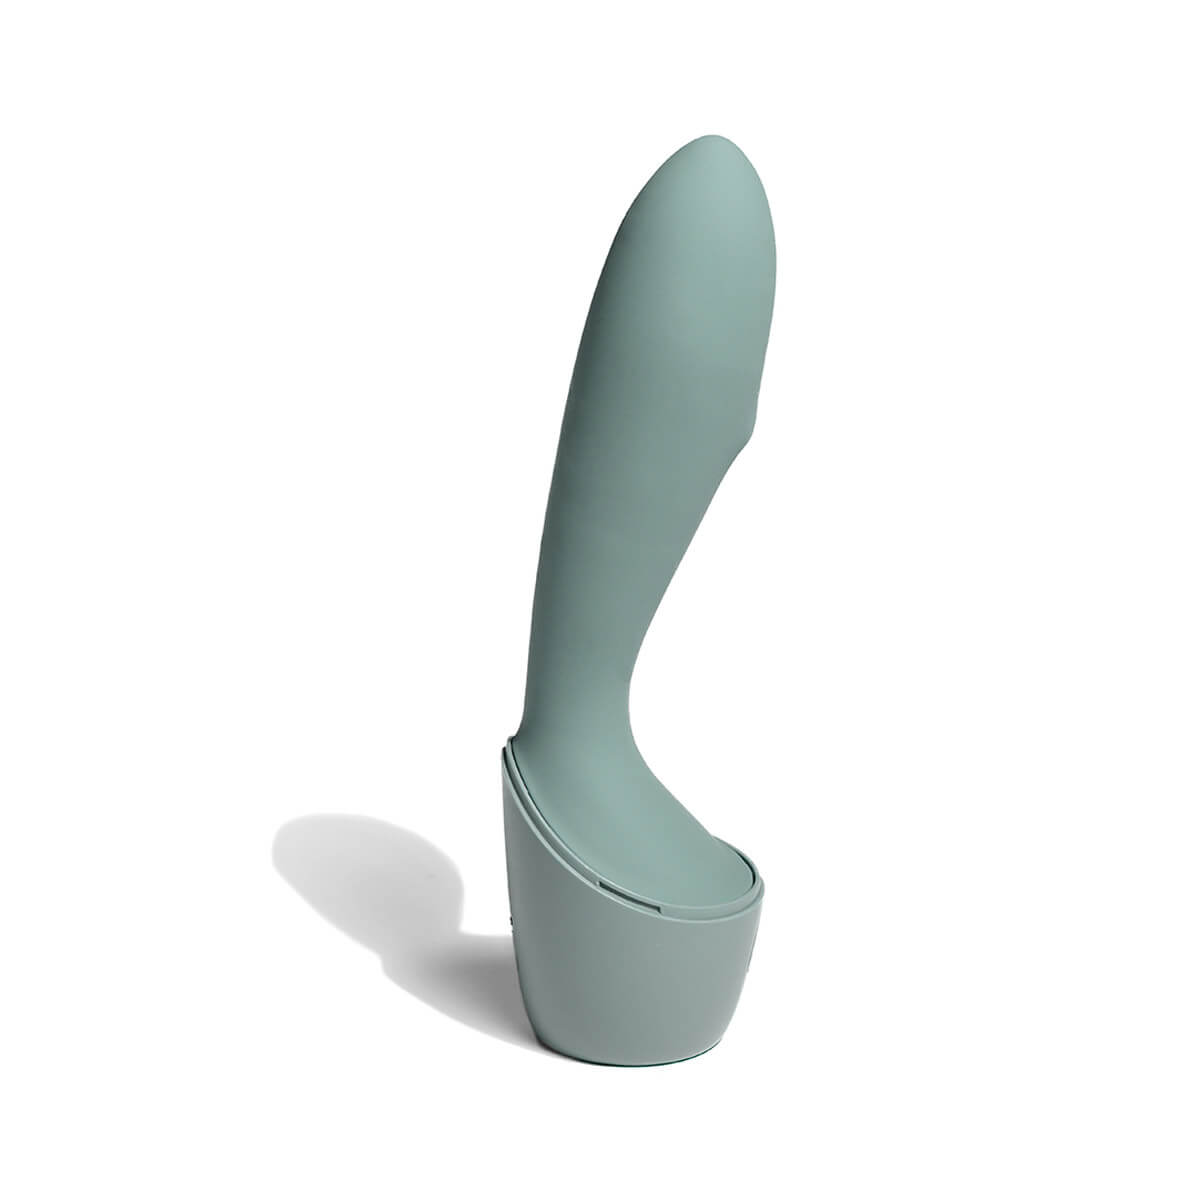 Army green robotic G-spot vibrator with stimulating rolling ball in the shaft Nudie Co